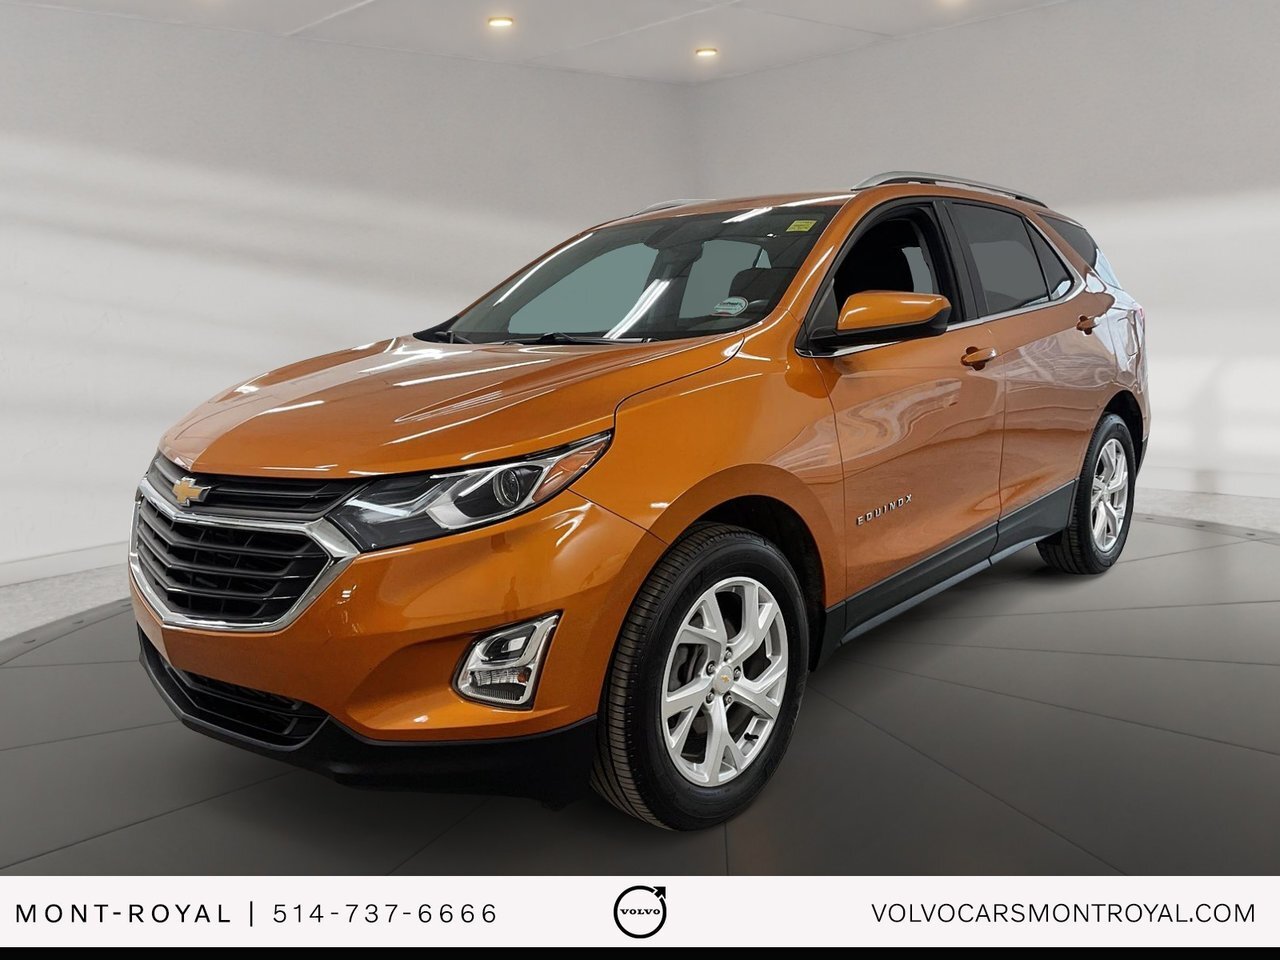 2019 Chevrolet Equinox LT Interest rates starting from 7.99% / Taux d'int